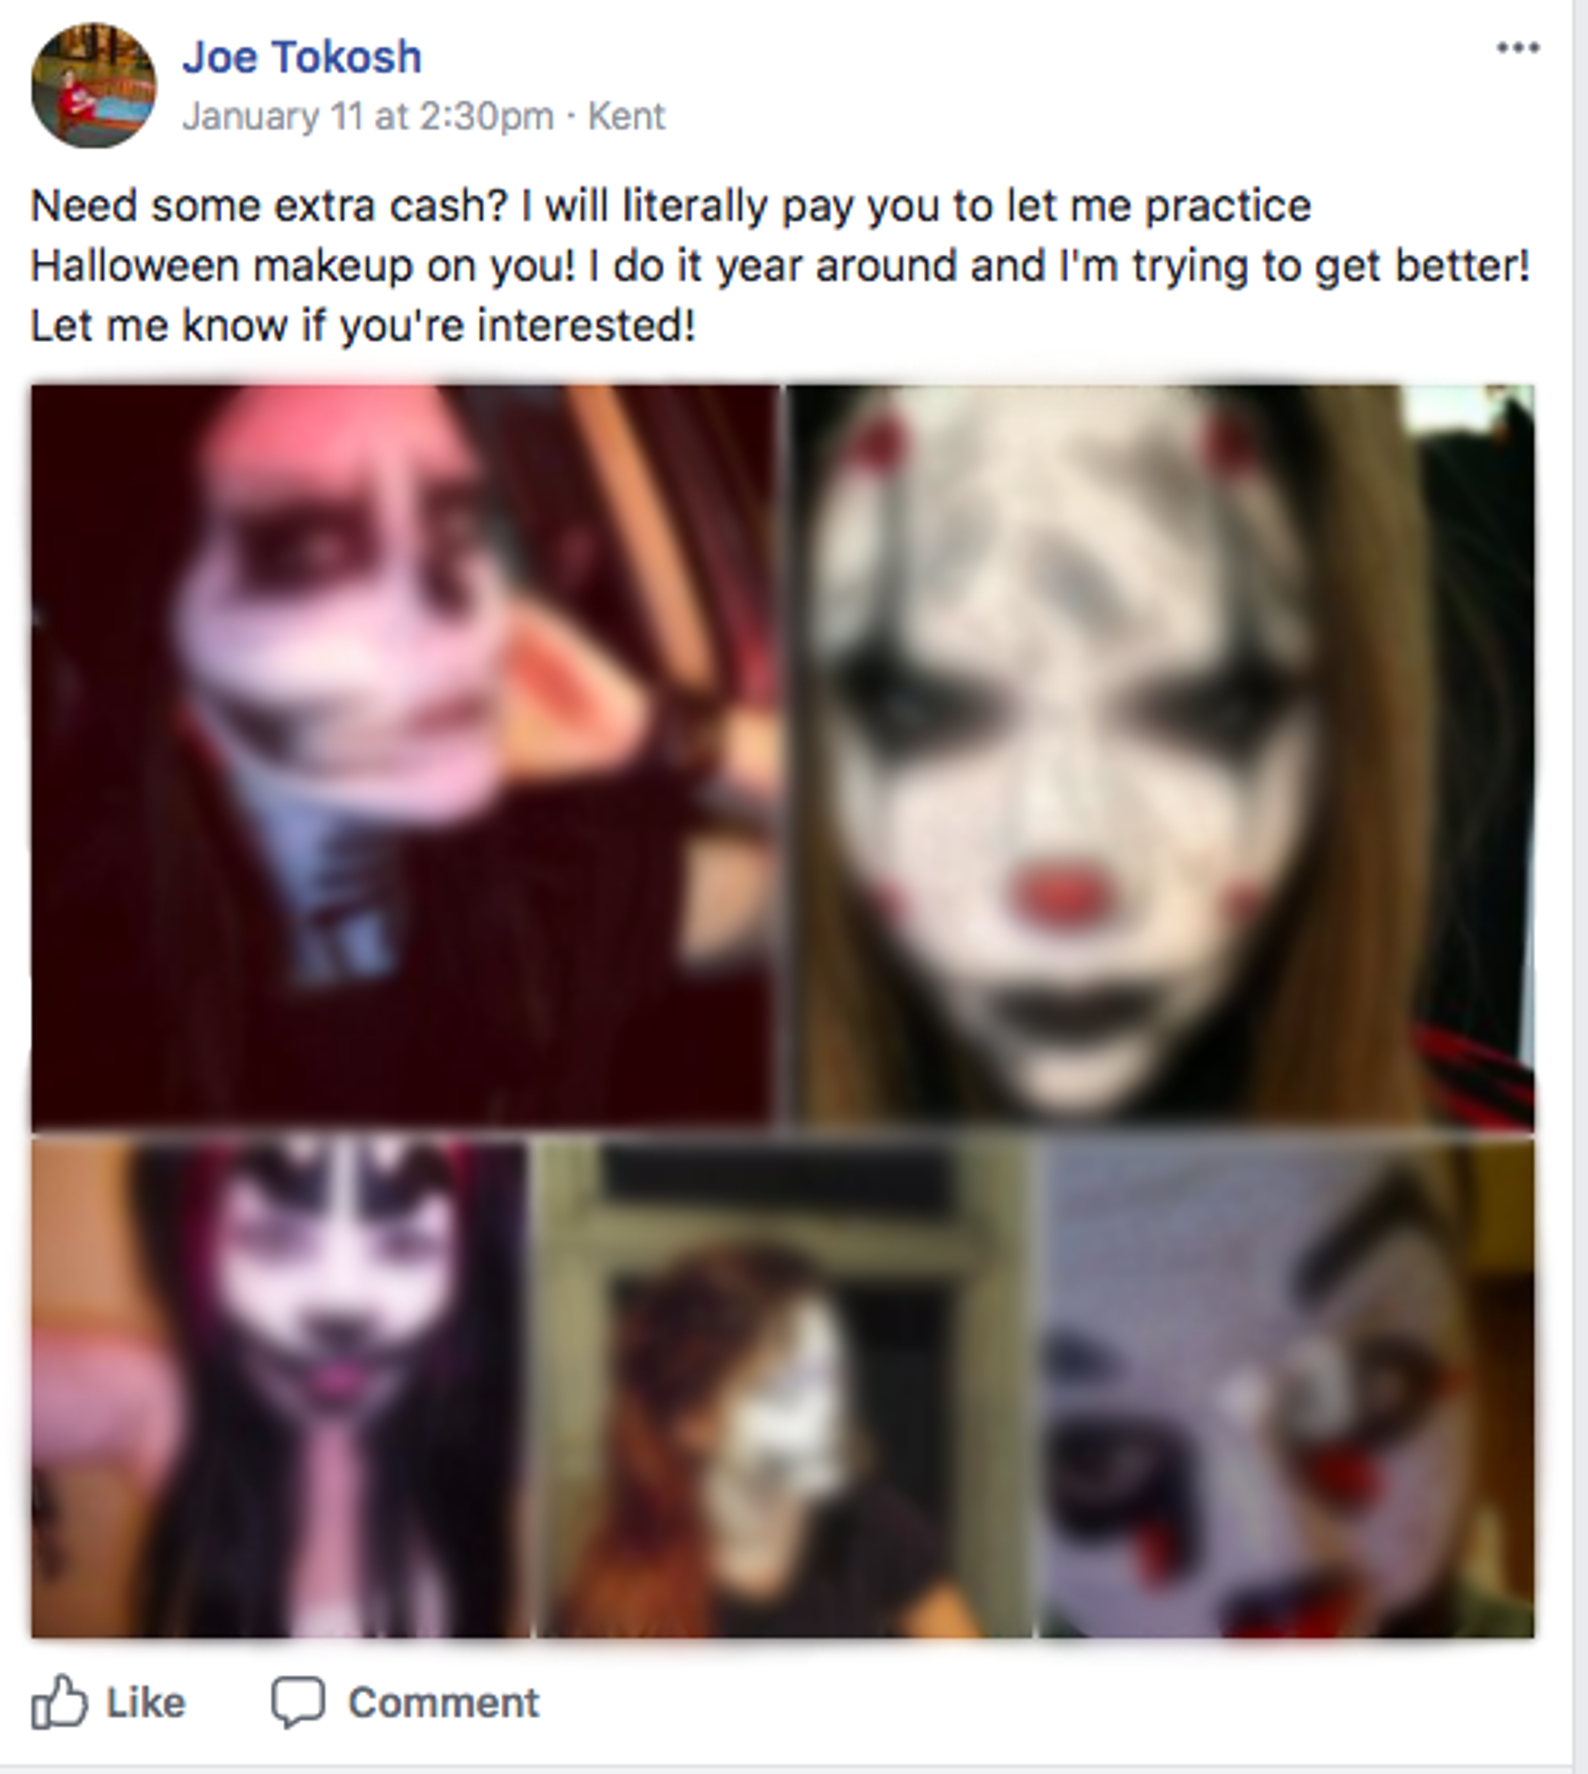 Joseph Tokosh would request pictures of painted clown faces from students in exchange for money